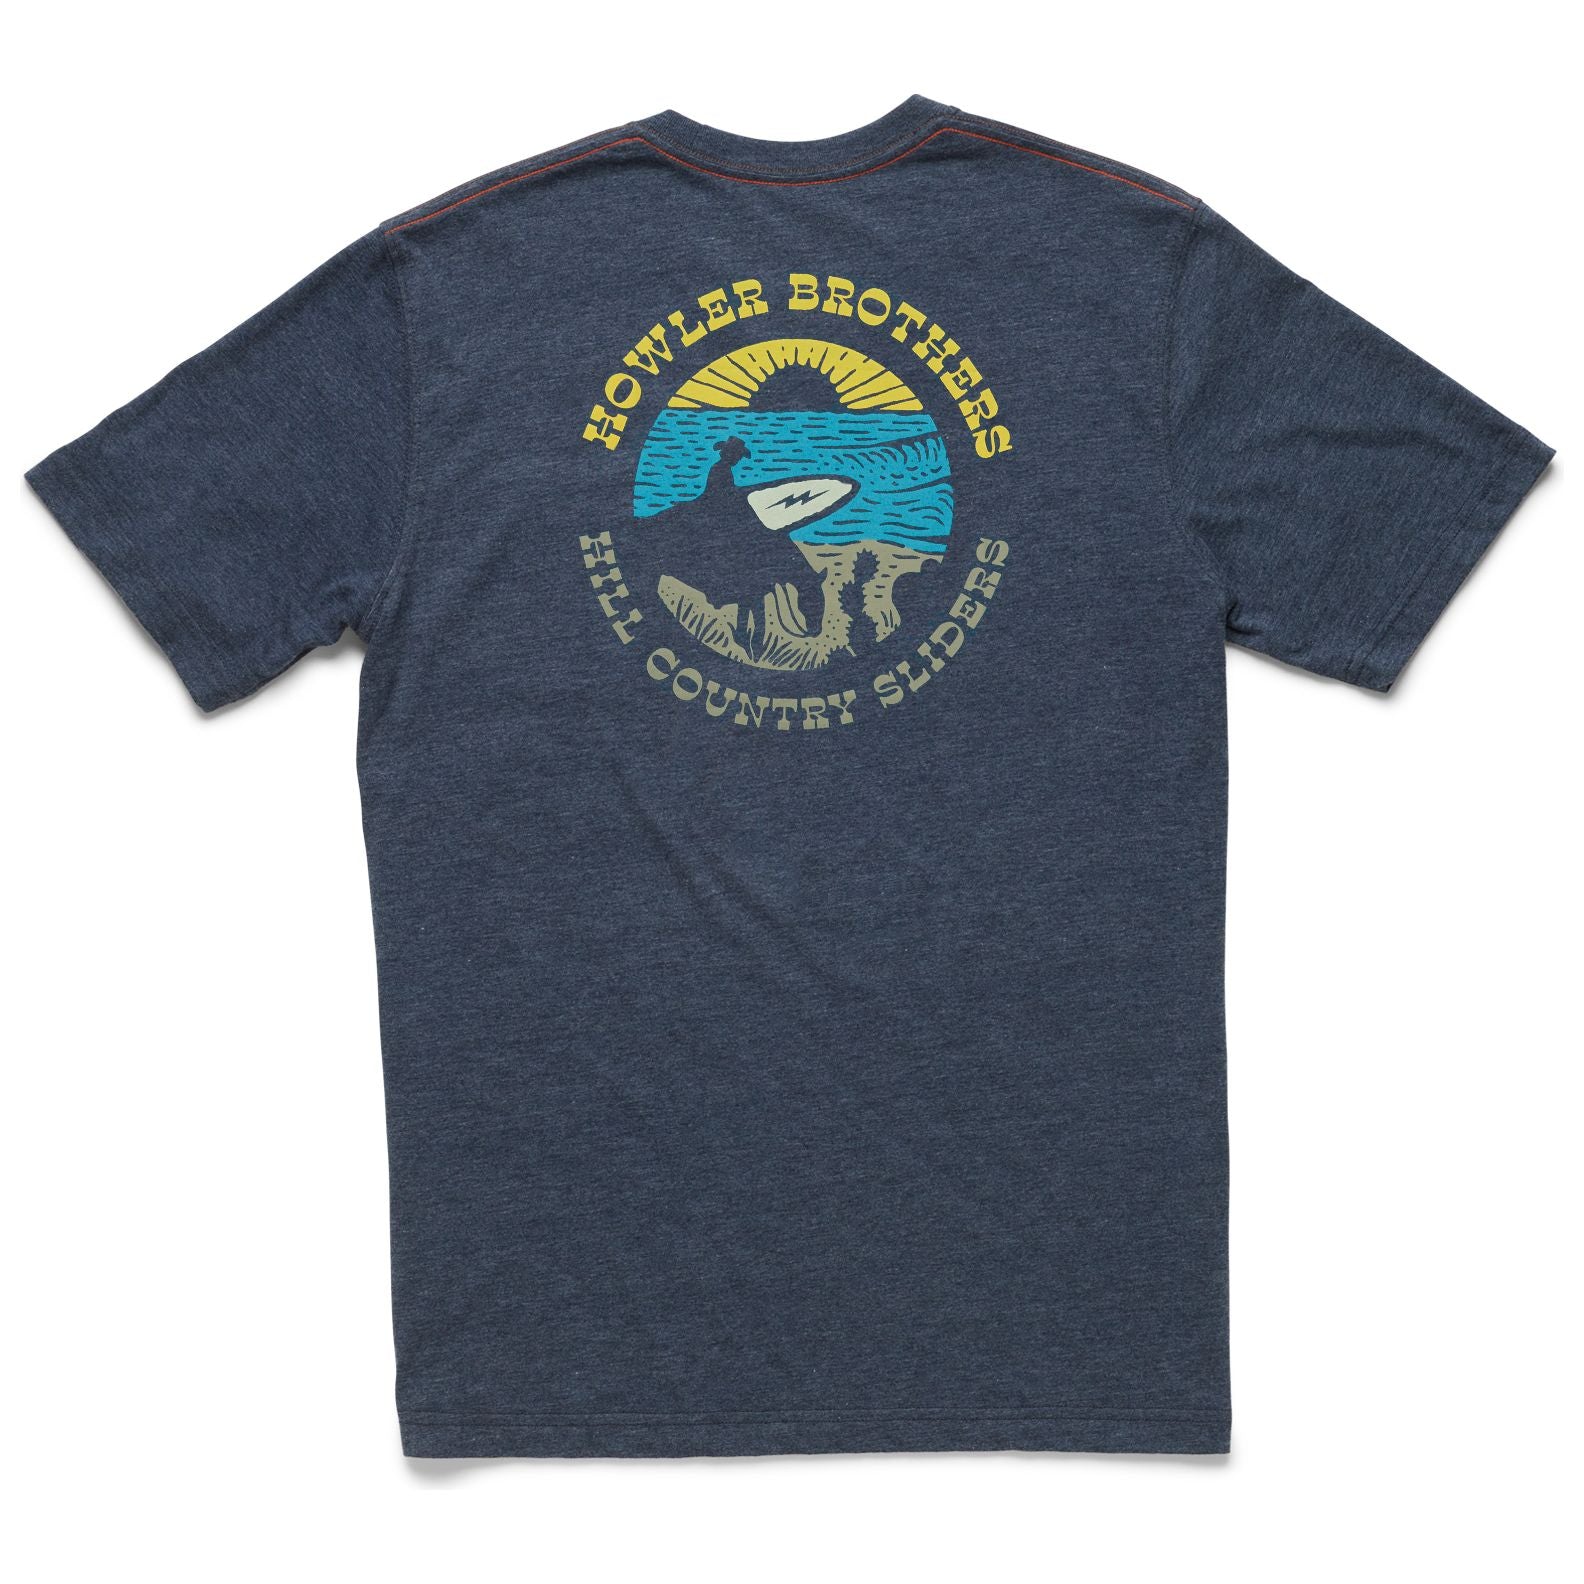 Howler Brothers Select Pocket T - Hill Country Sliders Crest : Key Largo Image 01